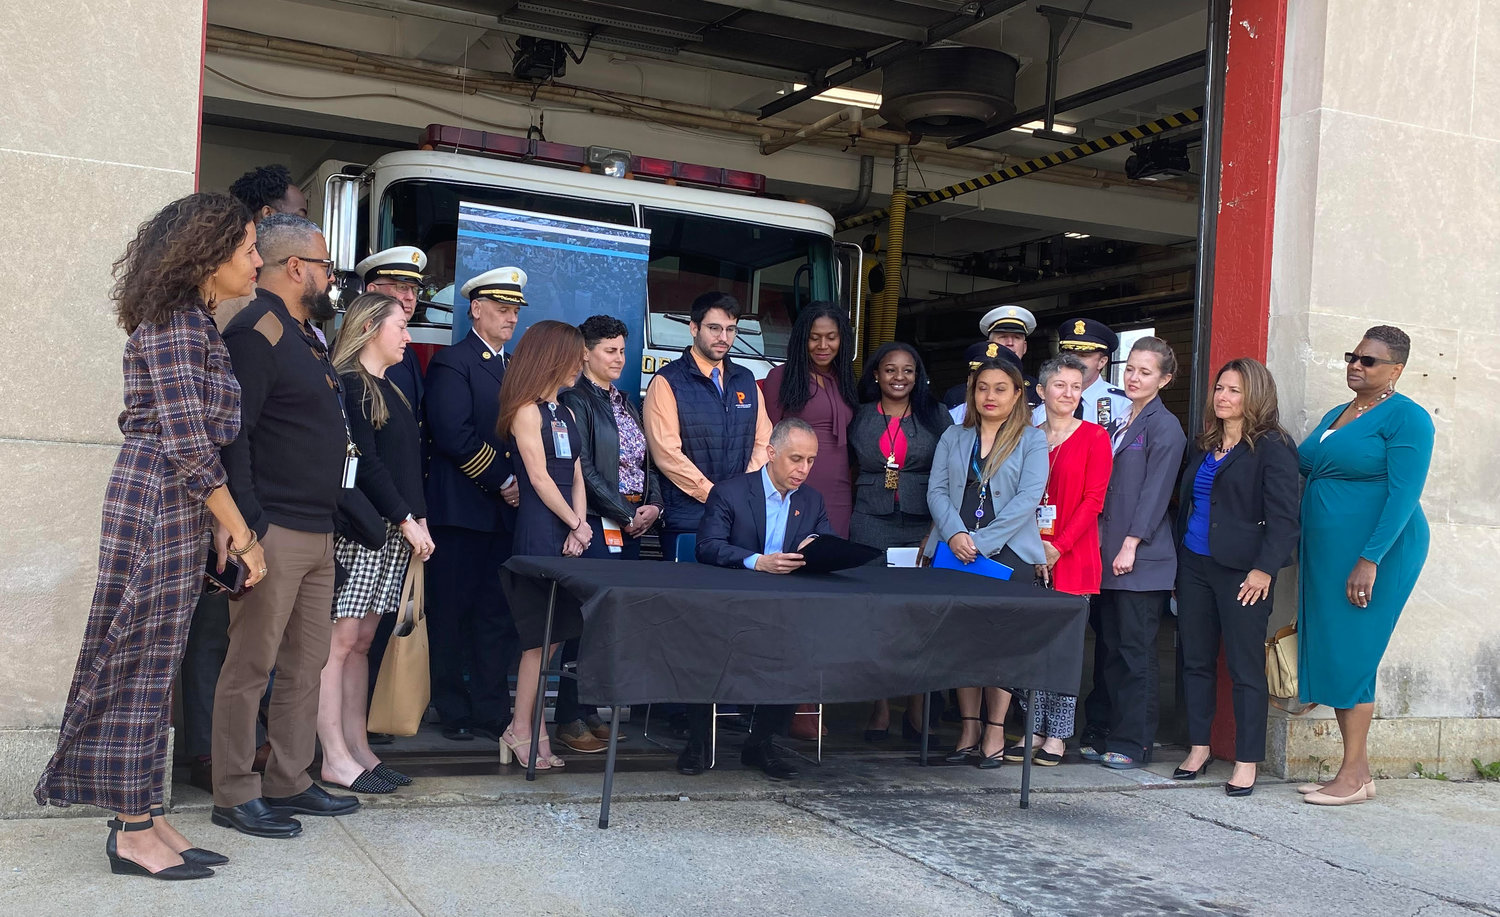 Mayor Jorge Elorza signs a proclamation in honor of Mental Health Awareness Month at the fire station on Branch Avenue, in a ceremony following the announcement of a new public safety initiative to embed behavioral health clinicians from The Providence Center at 9-1-1 offices and as part of a mobile response team.